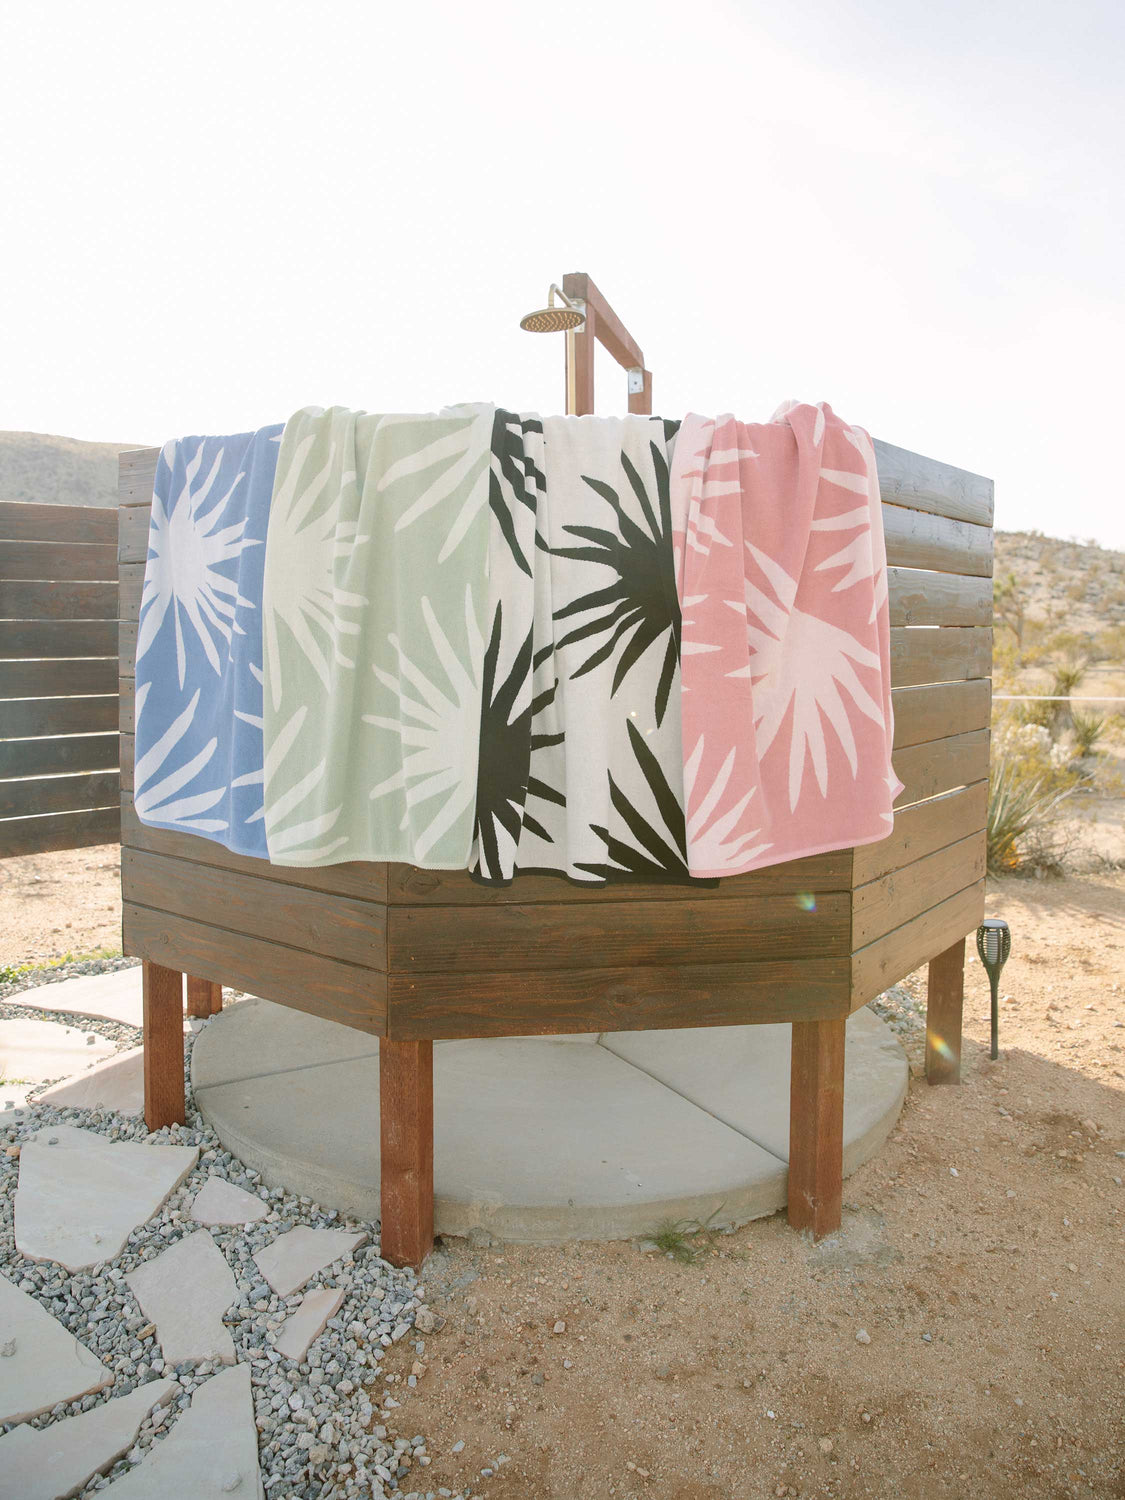 Blue and white, green and white, white and black, and pink and white tropical patterned cabana beach towels hanging over an outdoor shower.